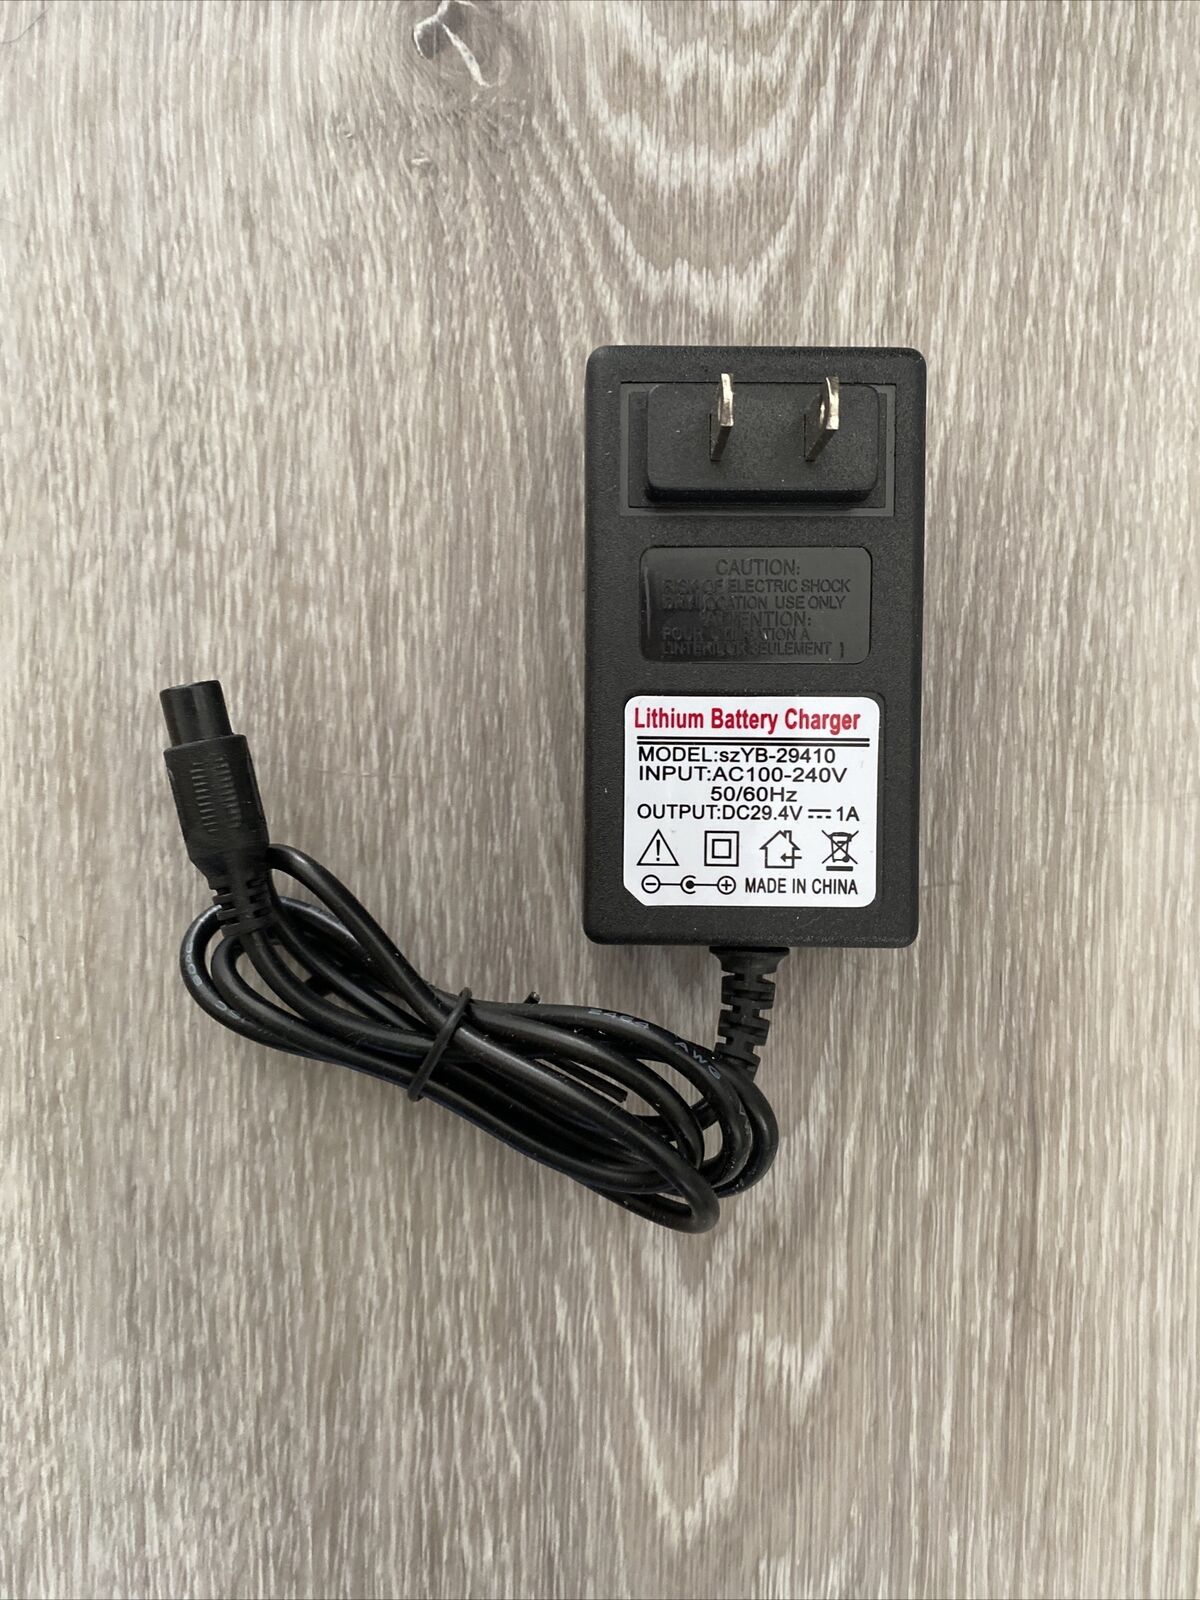 Replacement Charger For Swagtron T5 and T580 Hoverboard 29.4V Output 1A Model: T5, T580 Featured R